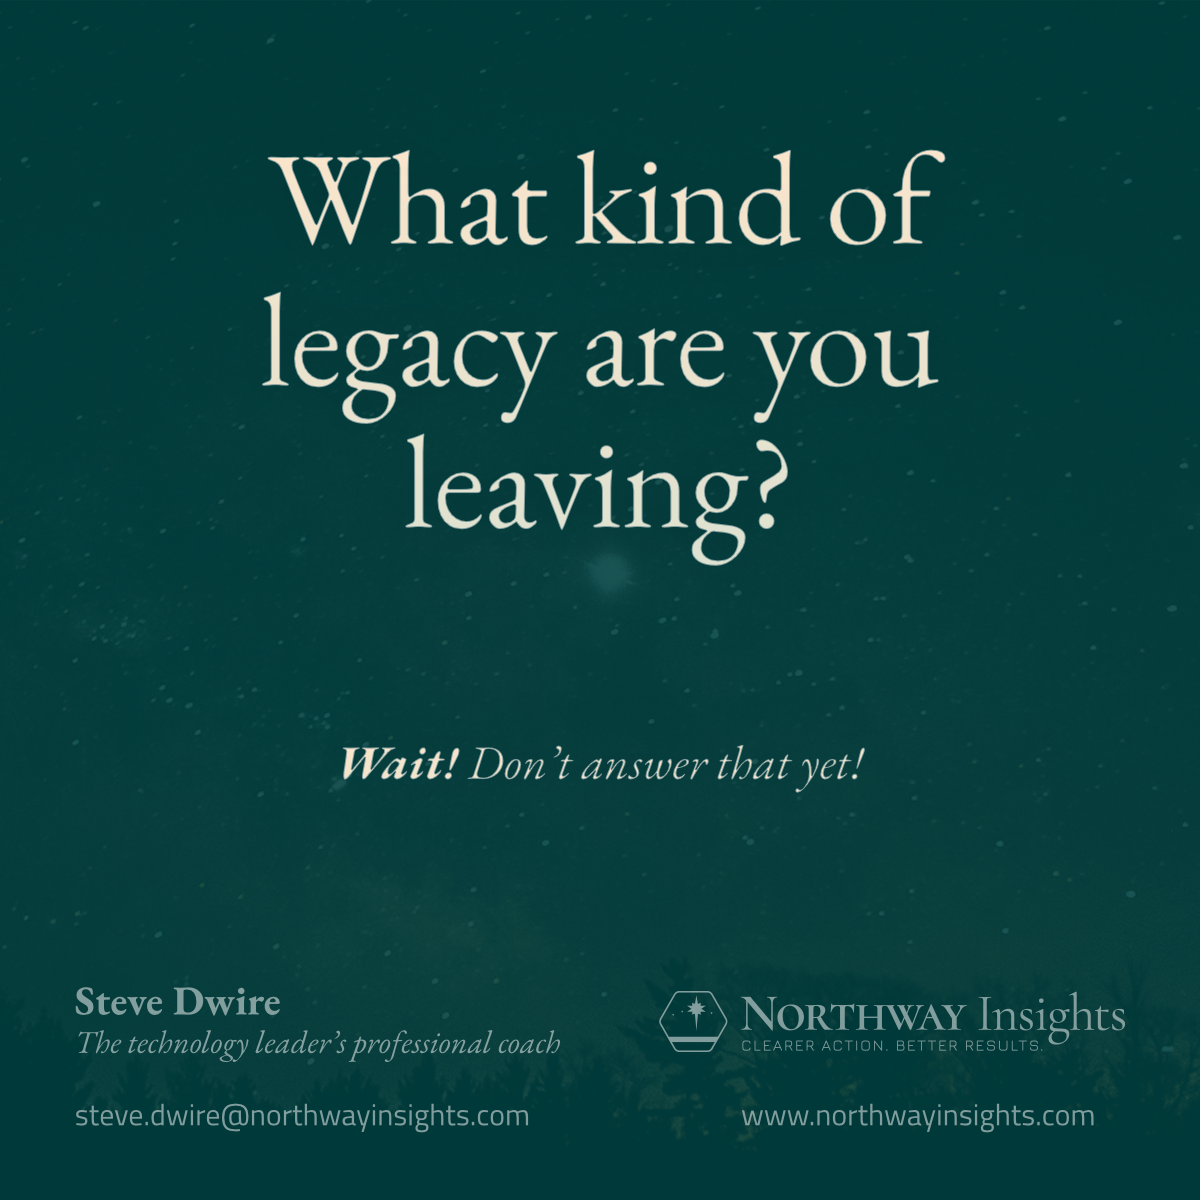 What kind of legacy are you leaving?